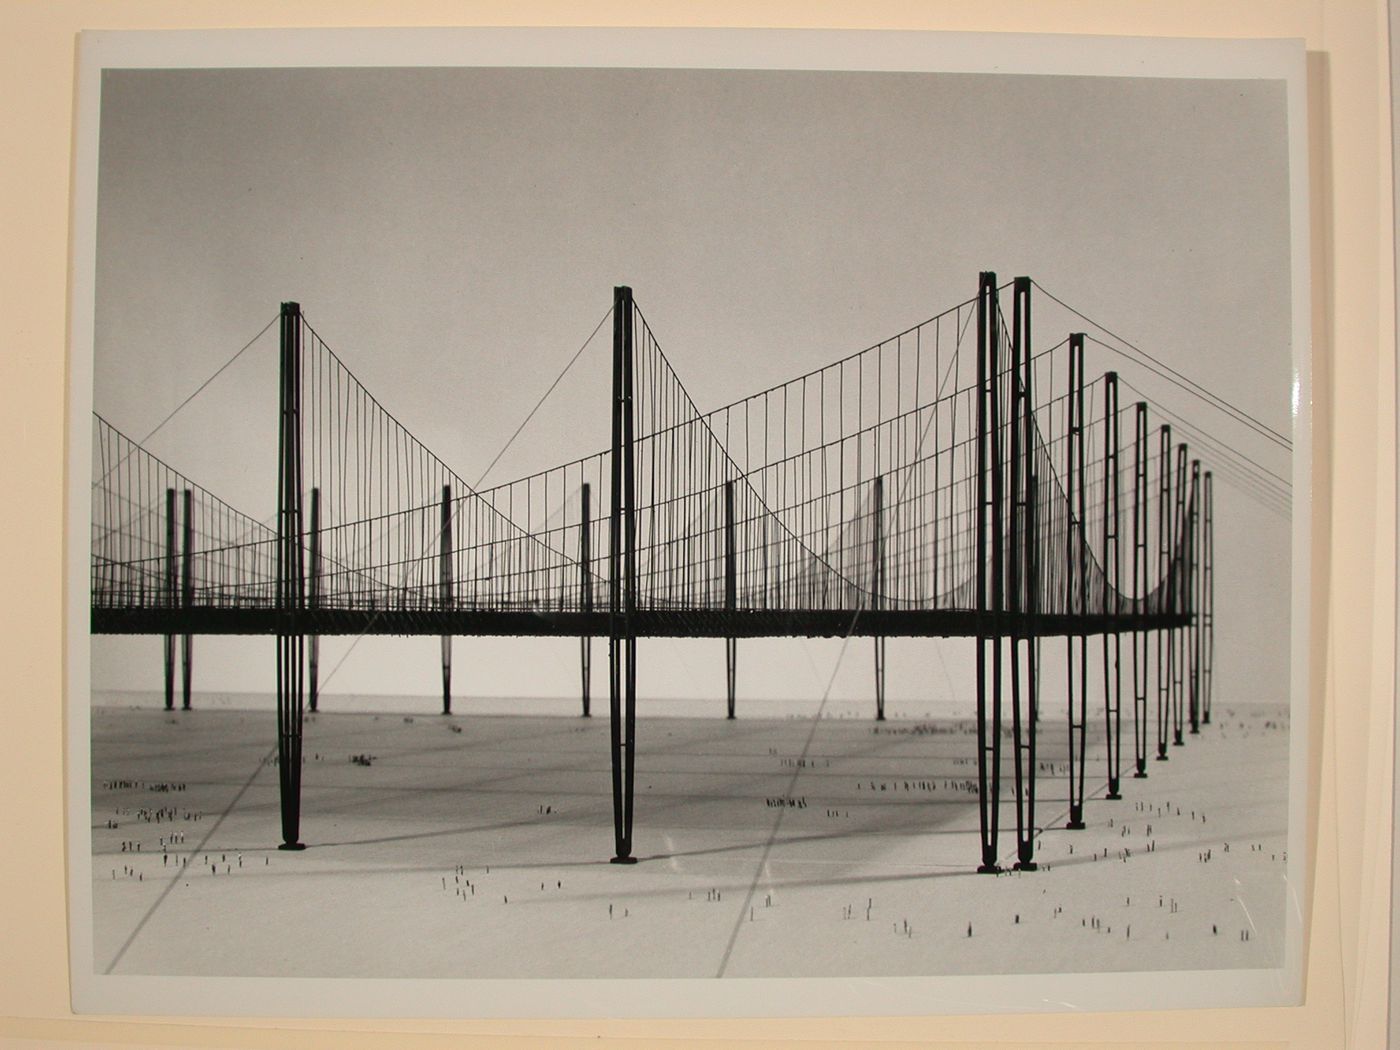 Photograph of a model for the Suspension System Proposal for the 1976 Chicago World's Fair